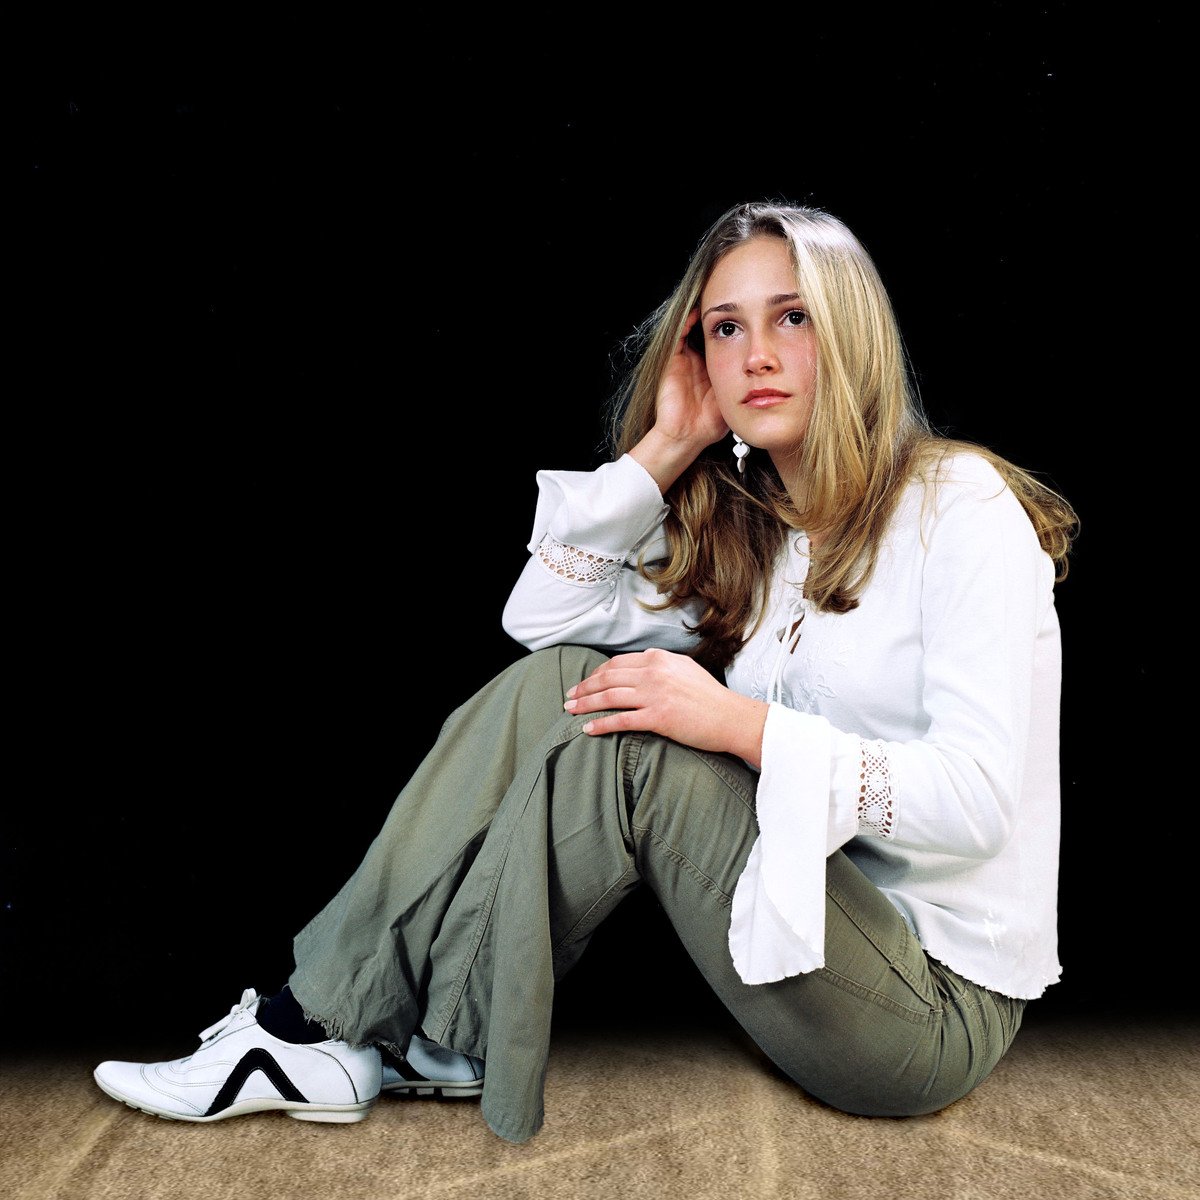 young woman with long hair sitting on floor, holding hand on her chin